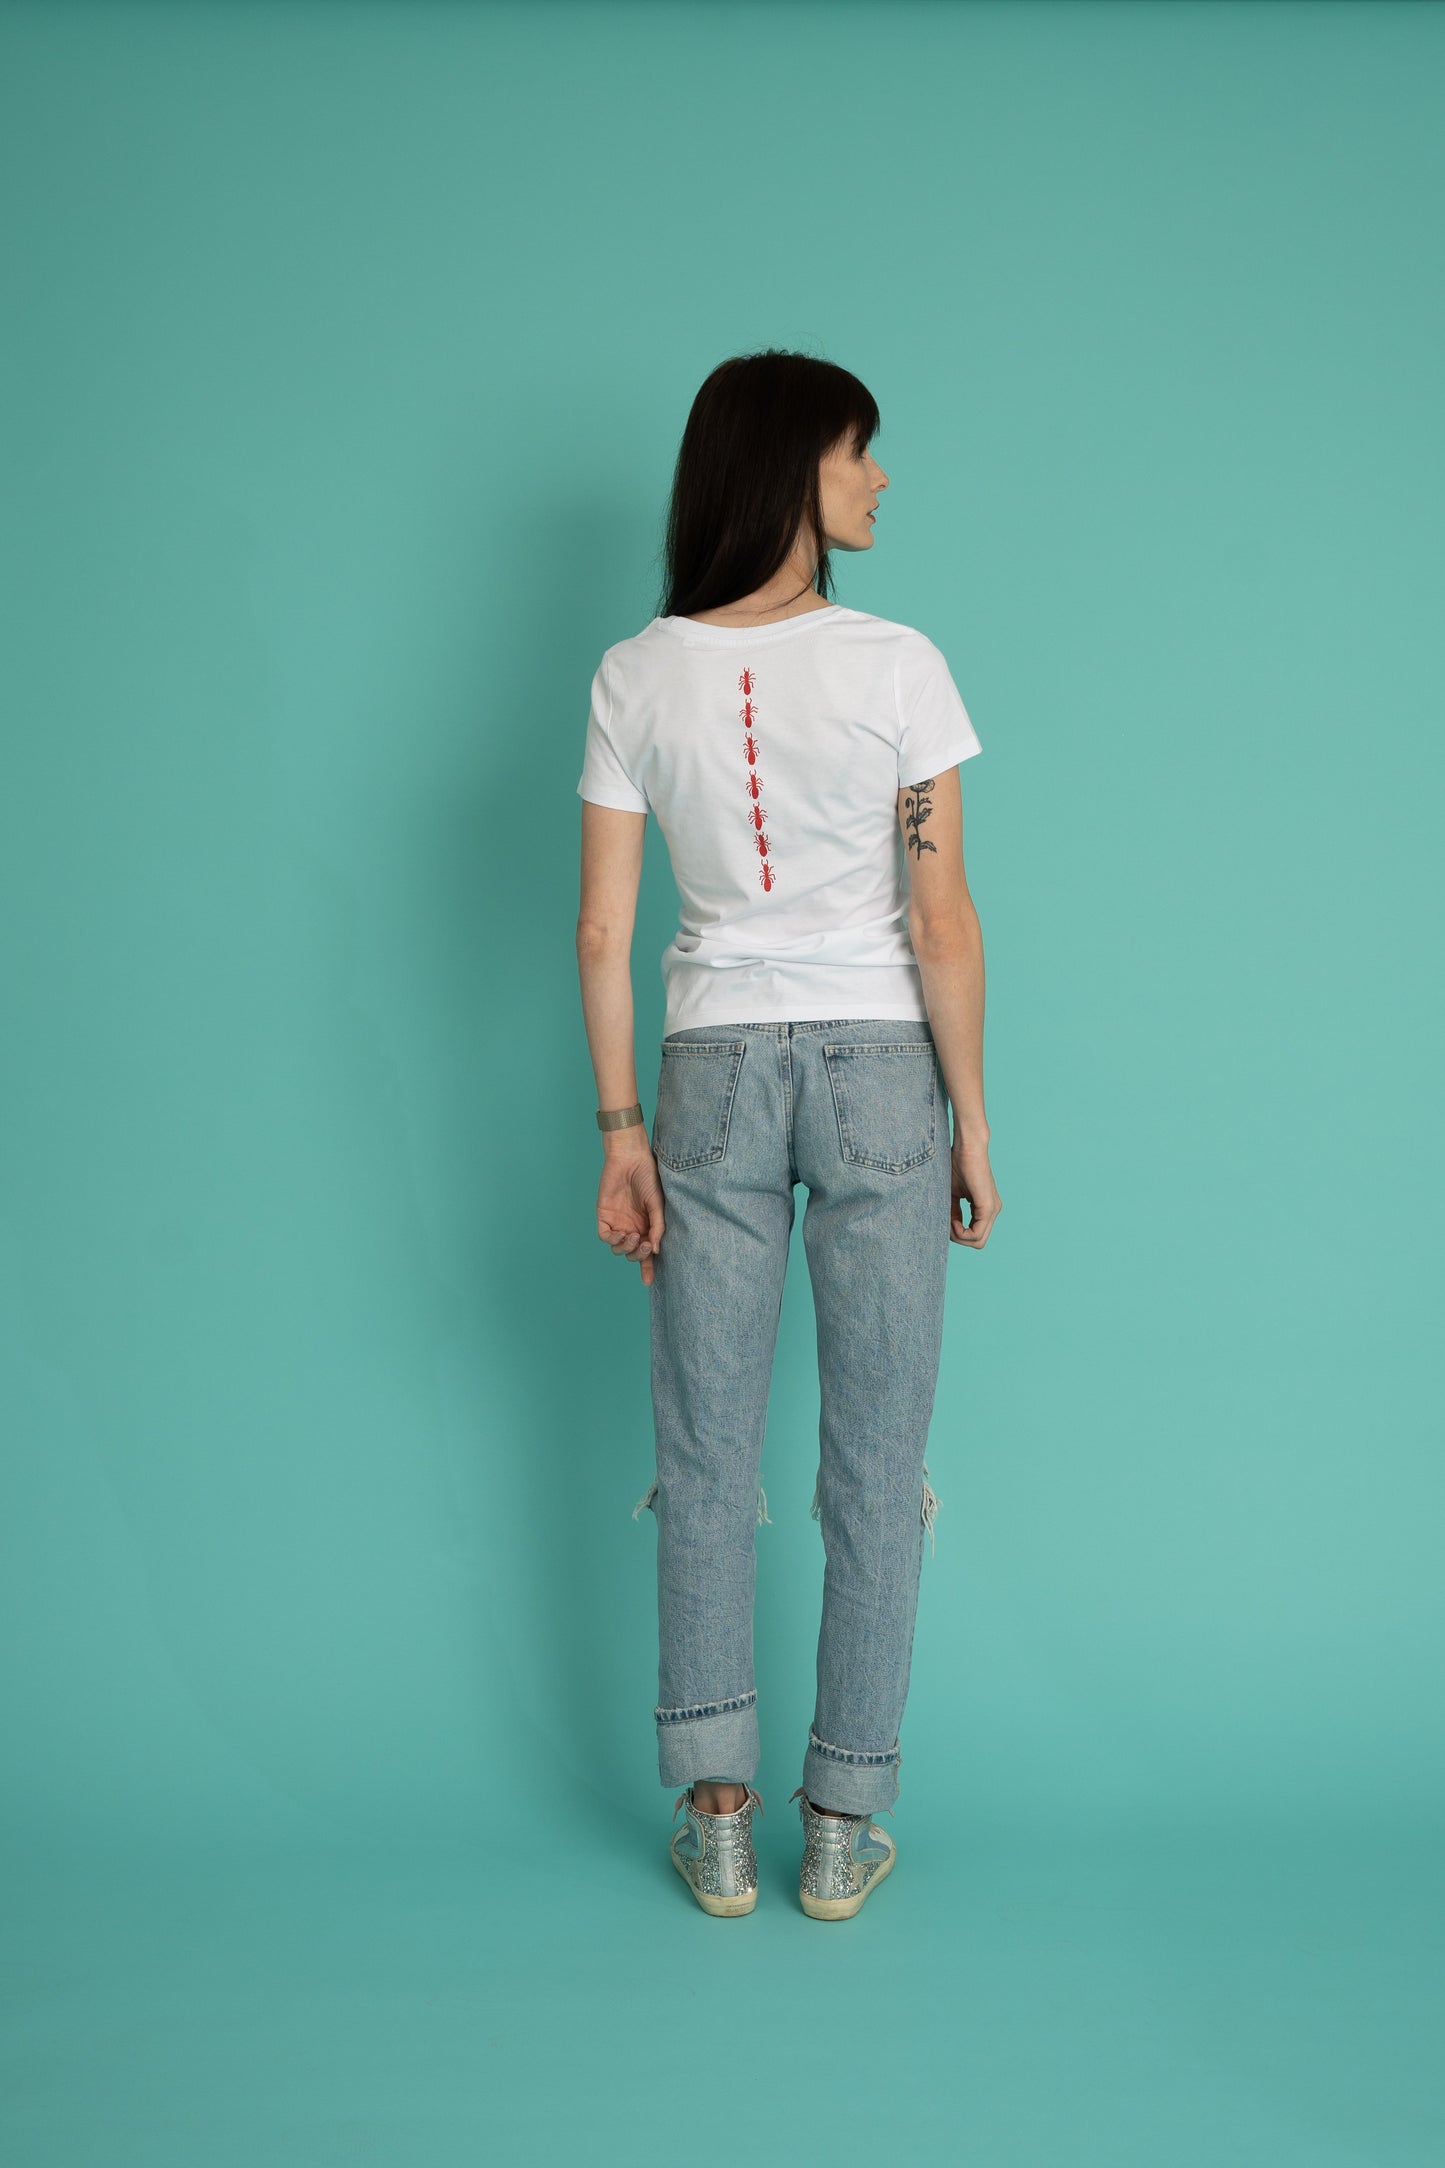 Red ants on a woman tee